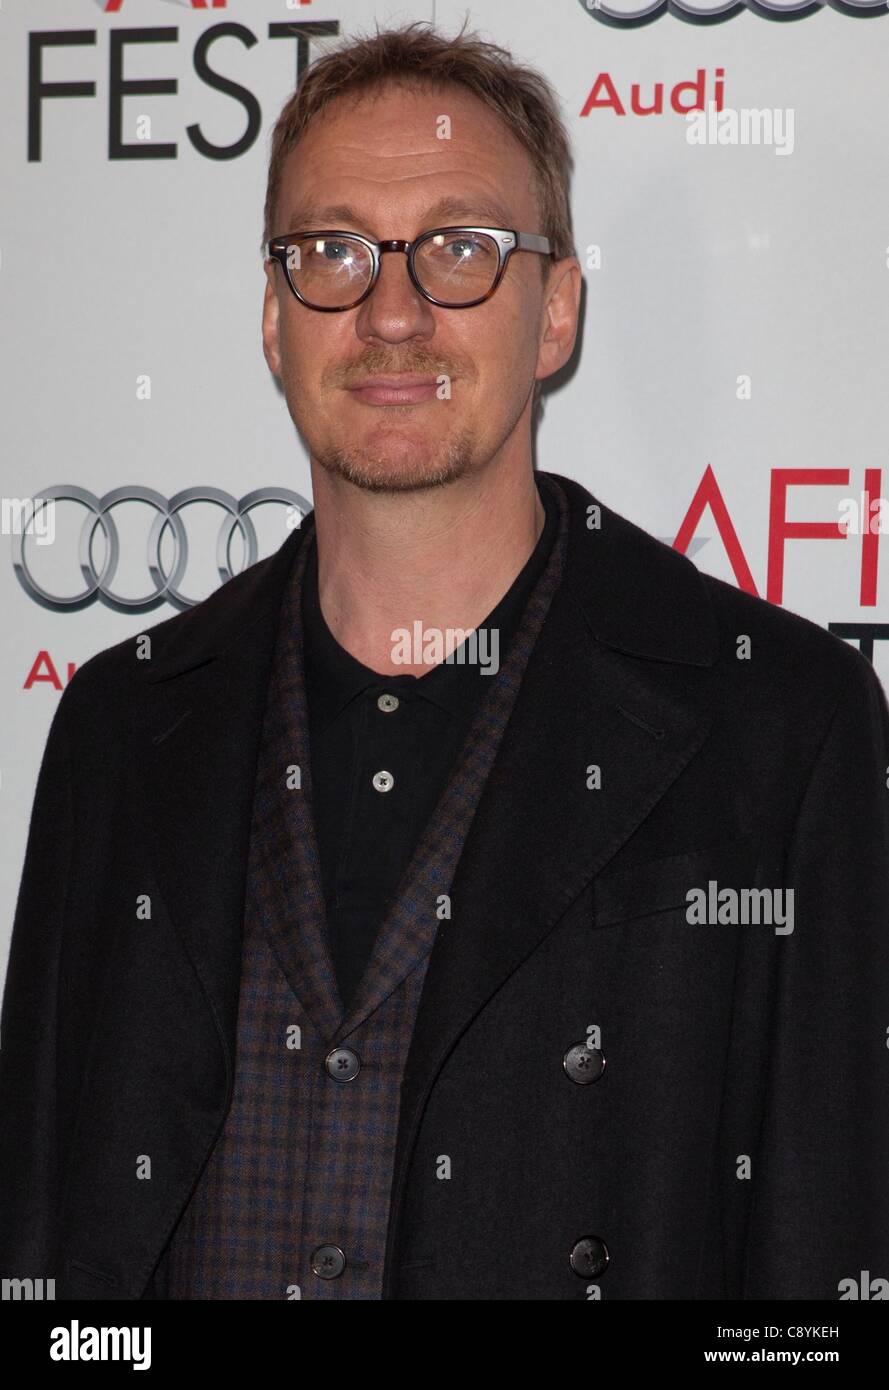 David Thewlis at arrivals for THE LADY Gala Screening at AFI FEST, Grauman's Chinese Theatre, Los Angeles, CA November 4, 2011. Photo By: Emiley Schweich/Everett Collection Stock Photo